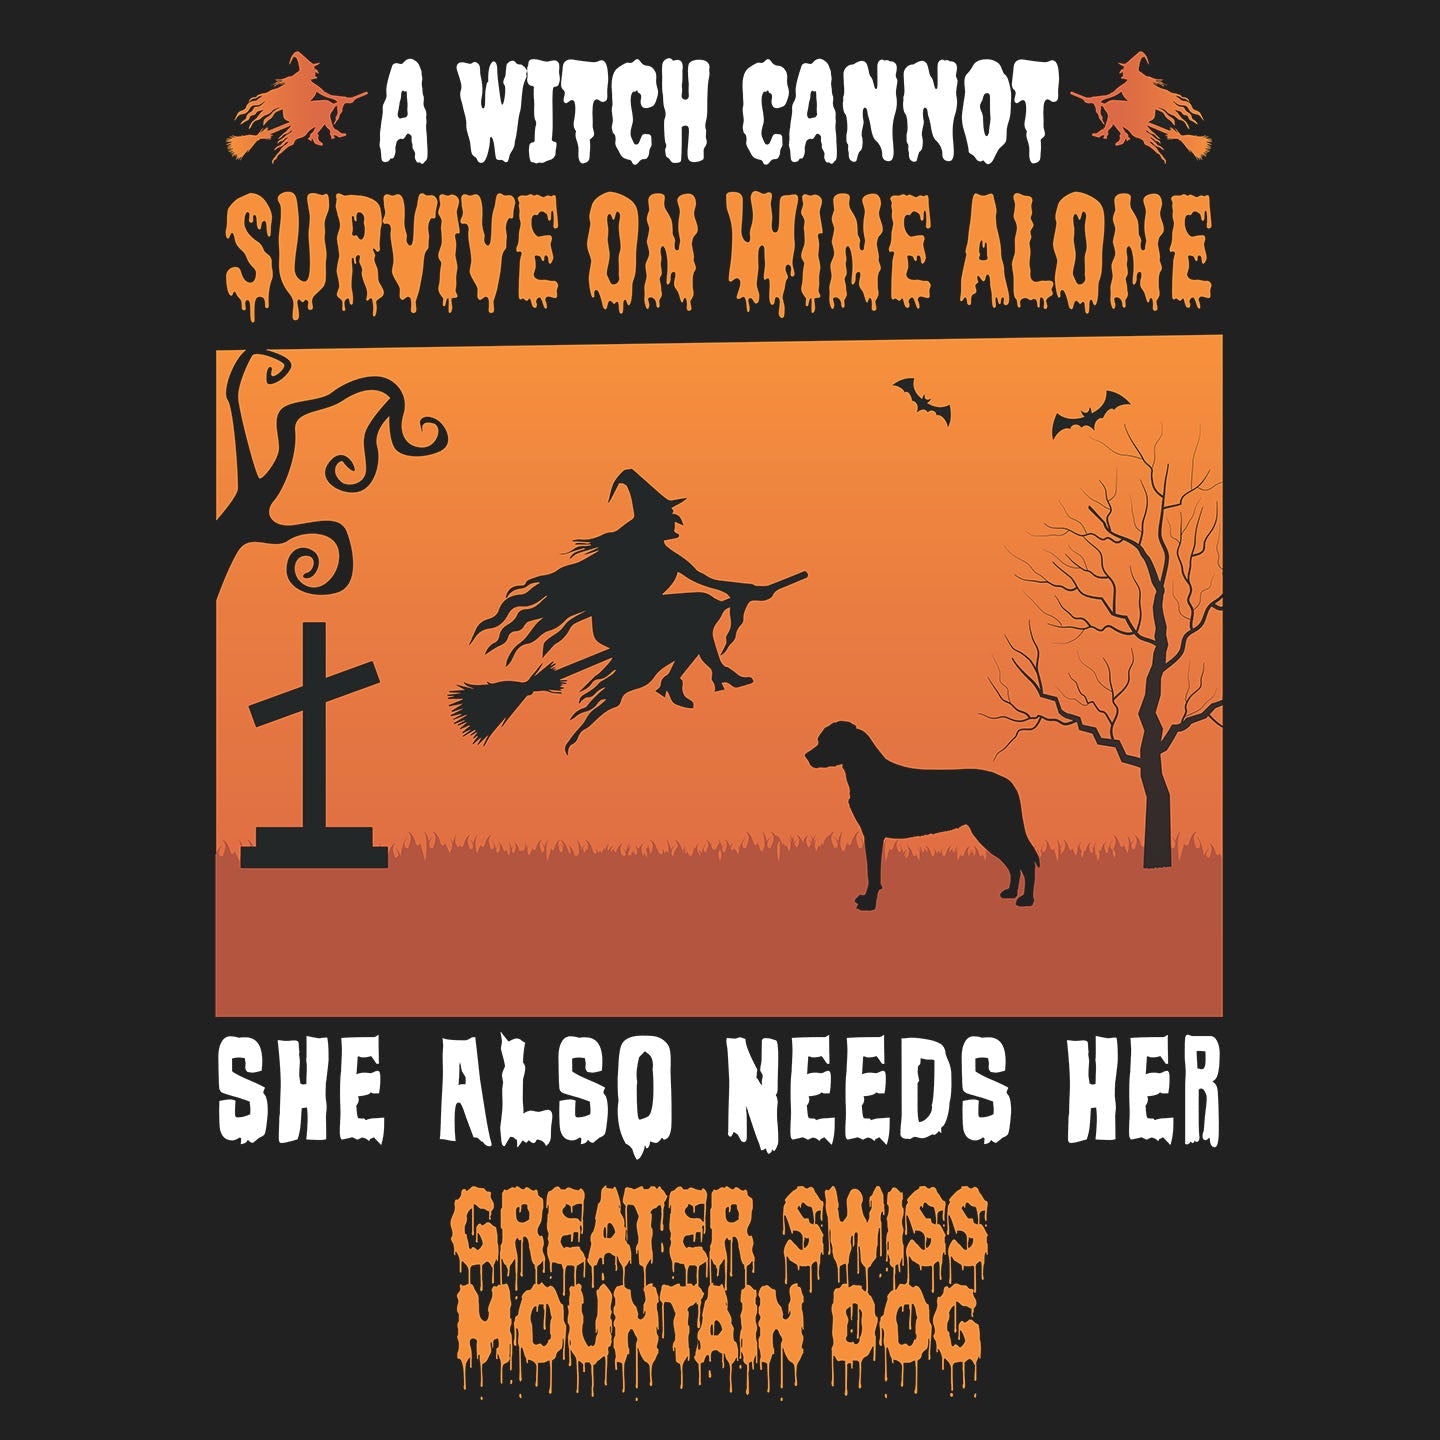 A Witch Needs Her Greater Swiss Mountain Dog - Women's V-Neck T-Shirt